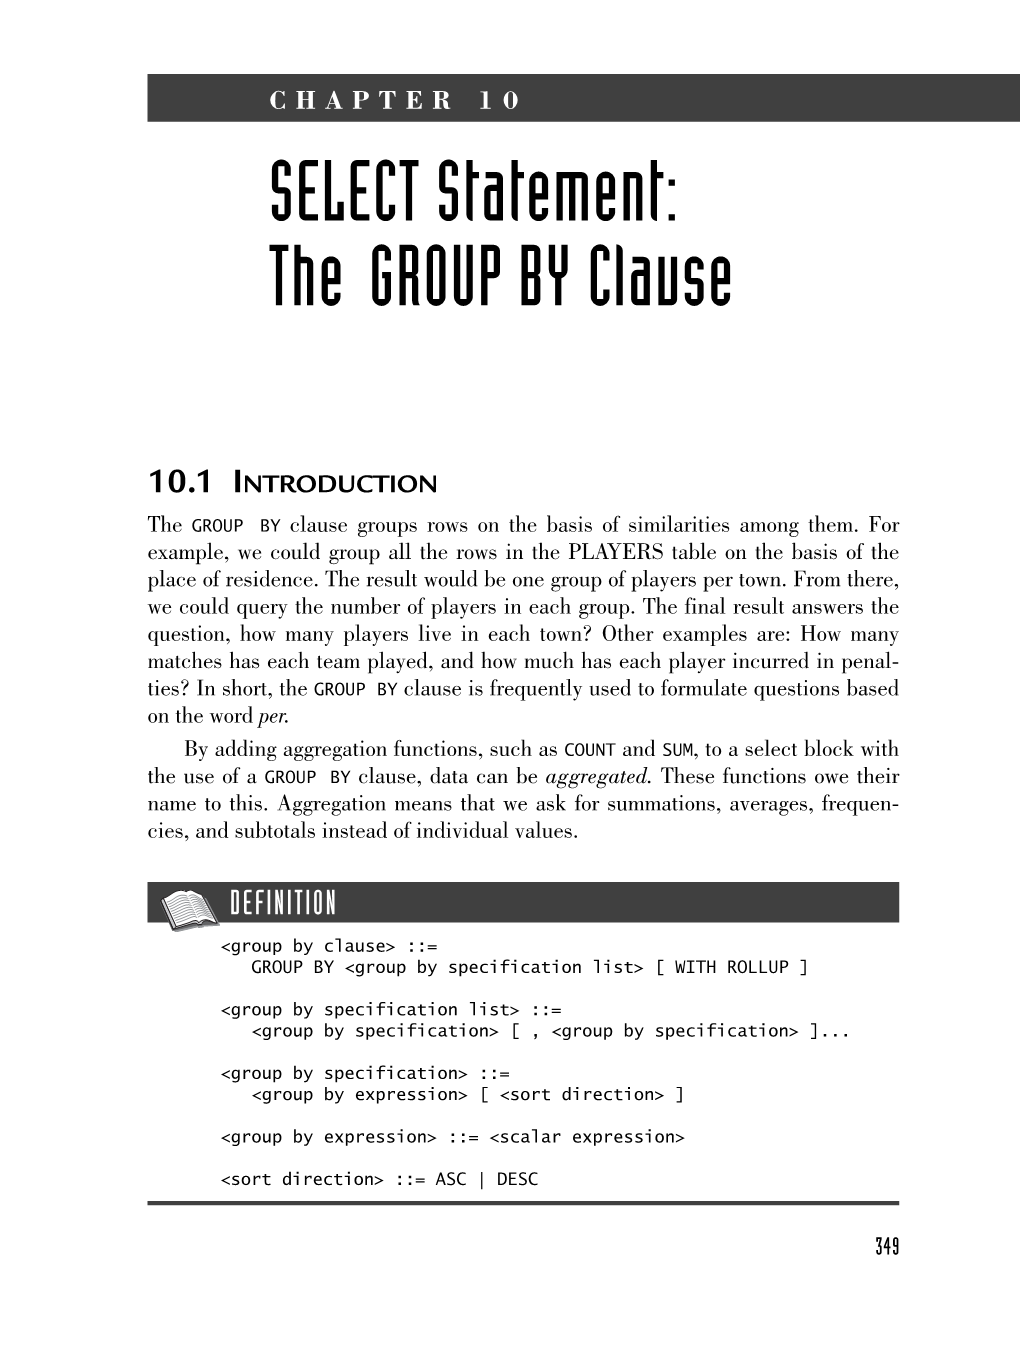 SELECT Statement: the GROUP by Clause